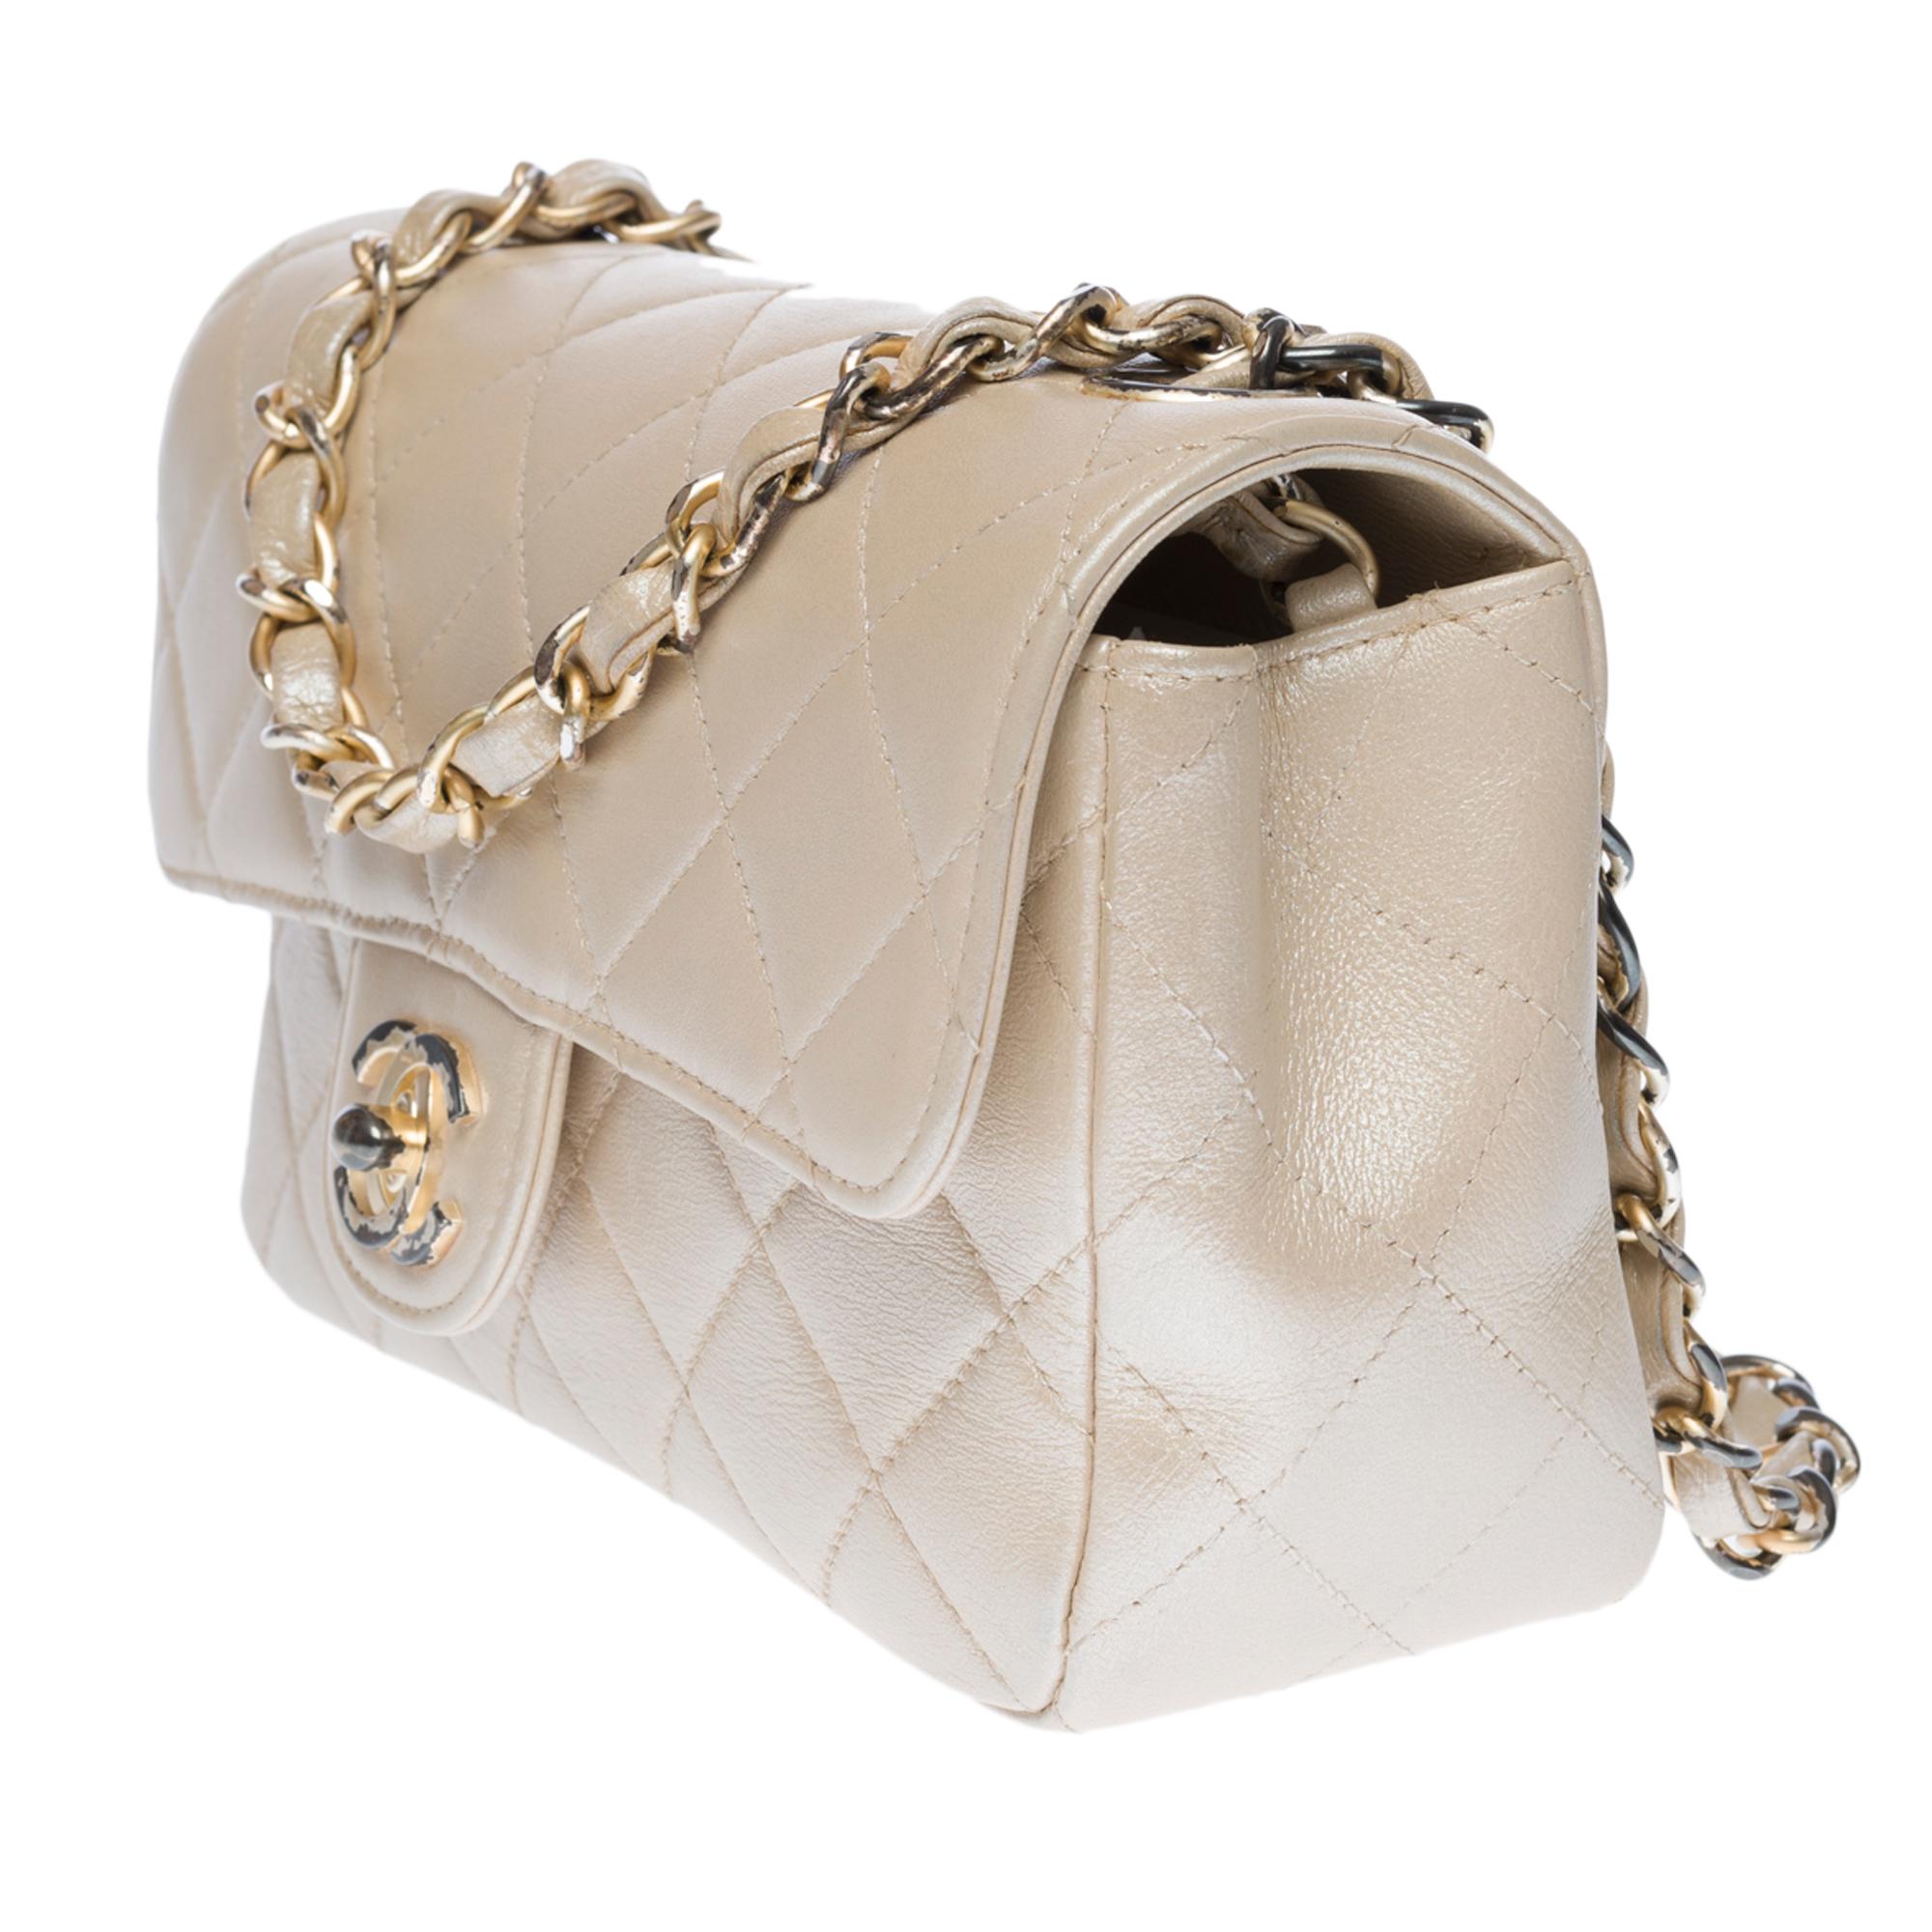 Beige Chanel Mini Timeless flap shoulder bag in metallic mother-of-pearl leather, GHW